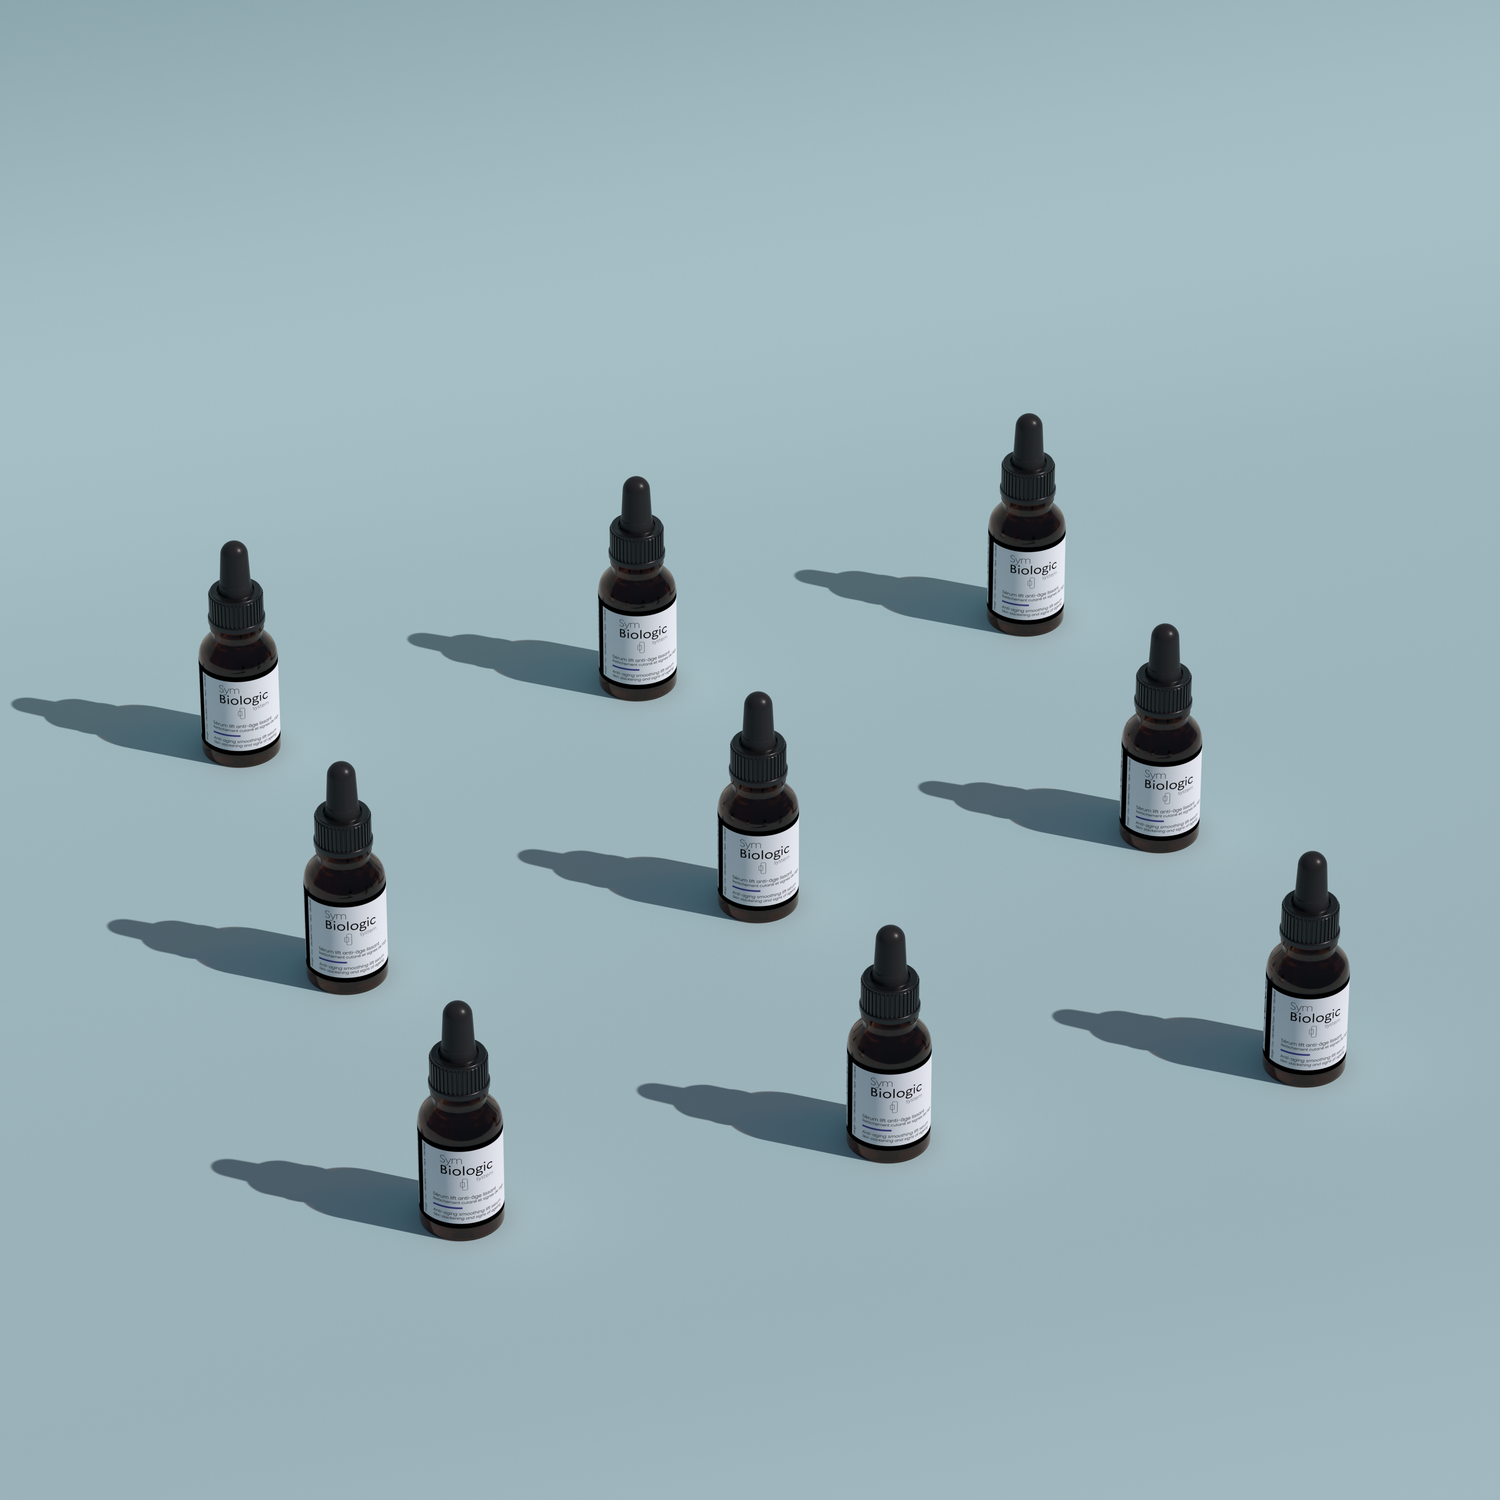 The Serum: The Strategic Choice for Targeted, Effective Care